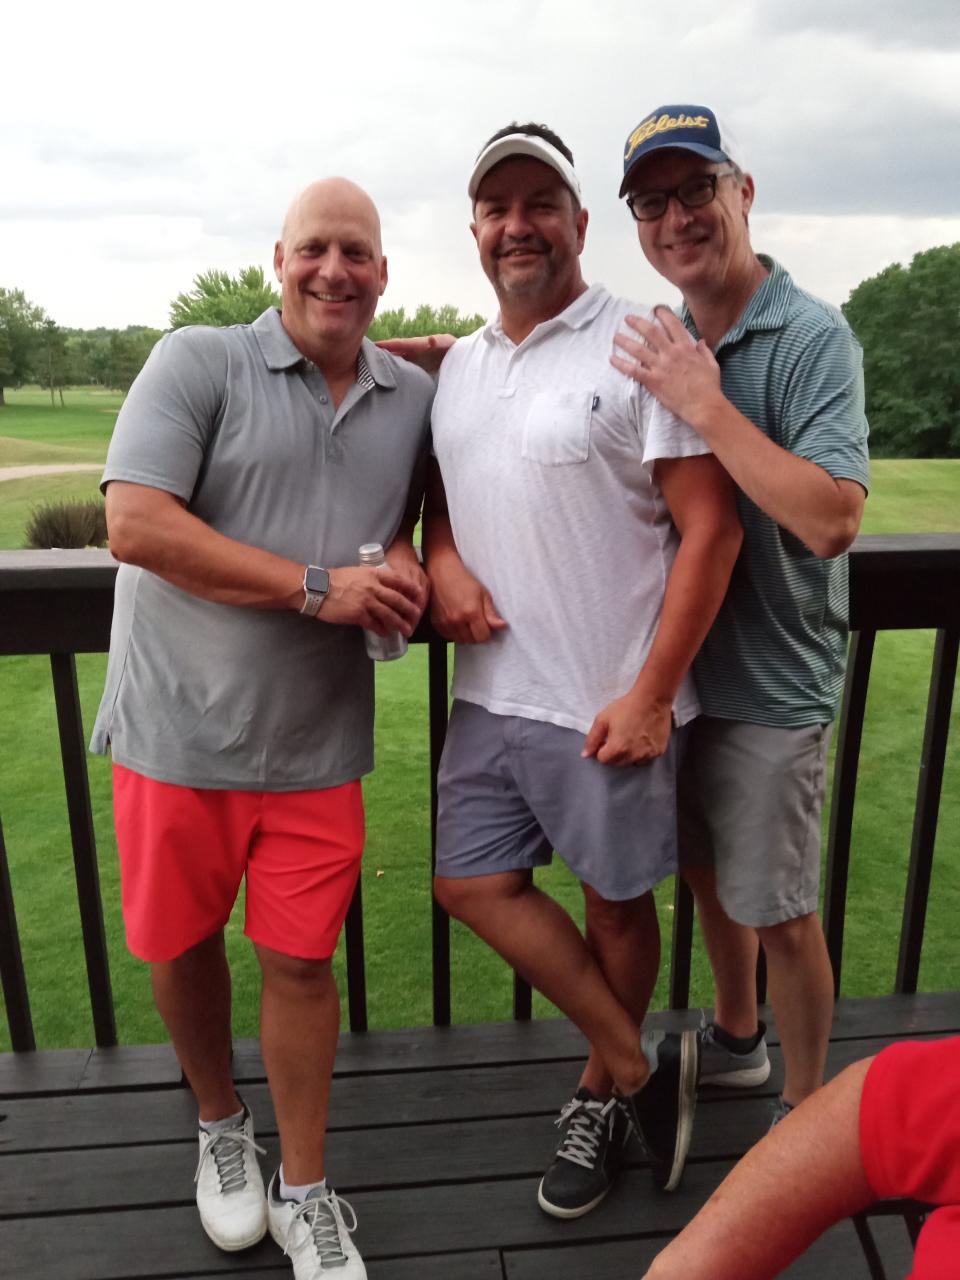 Pictured are, from left, Andy Pilsl, Dan Nett and Brian Wilderman